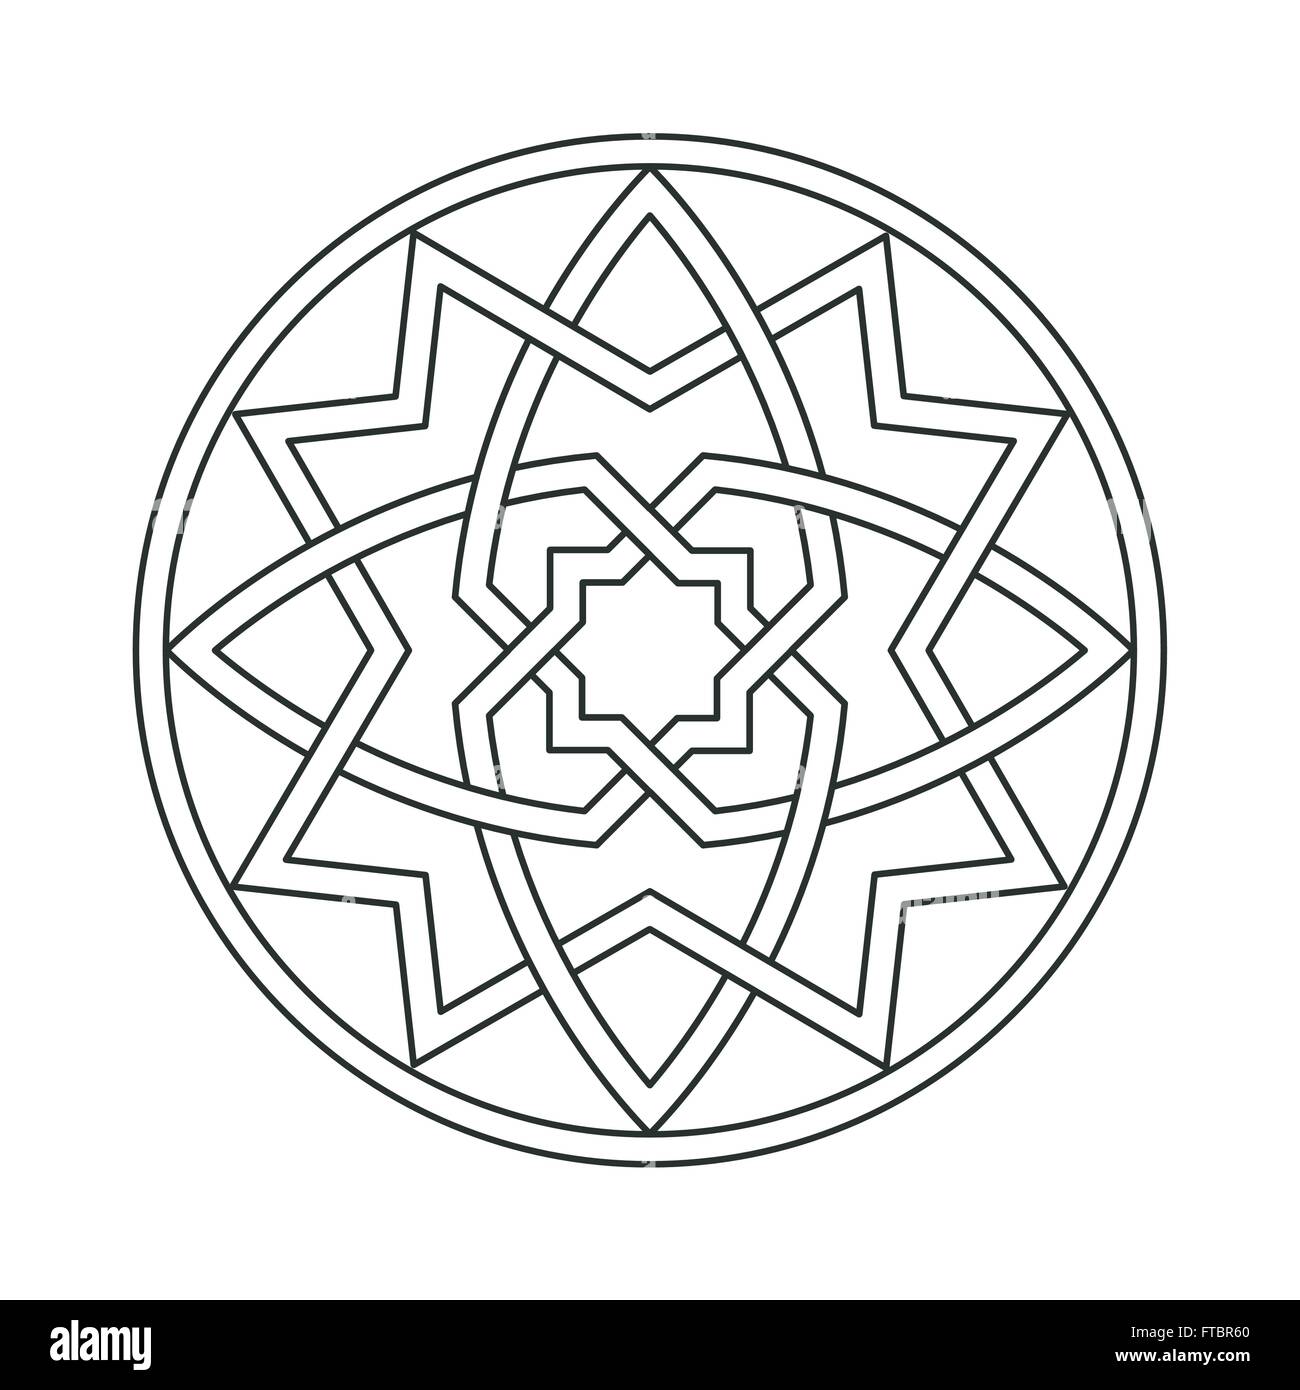 Gothic abstract ornament interlaced motif Stock Vector